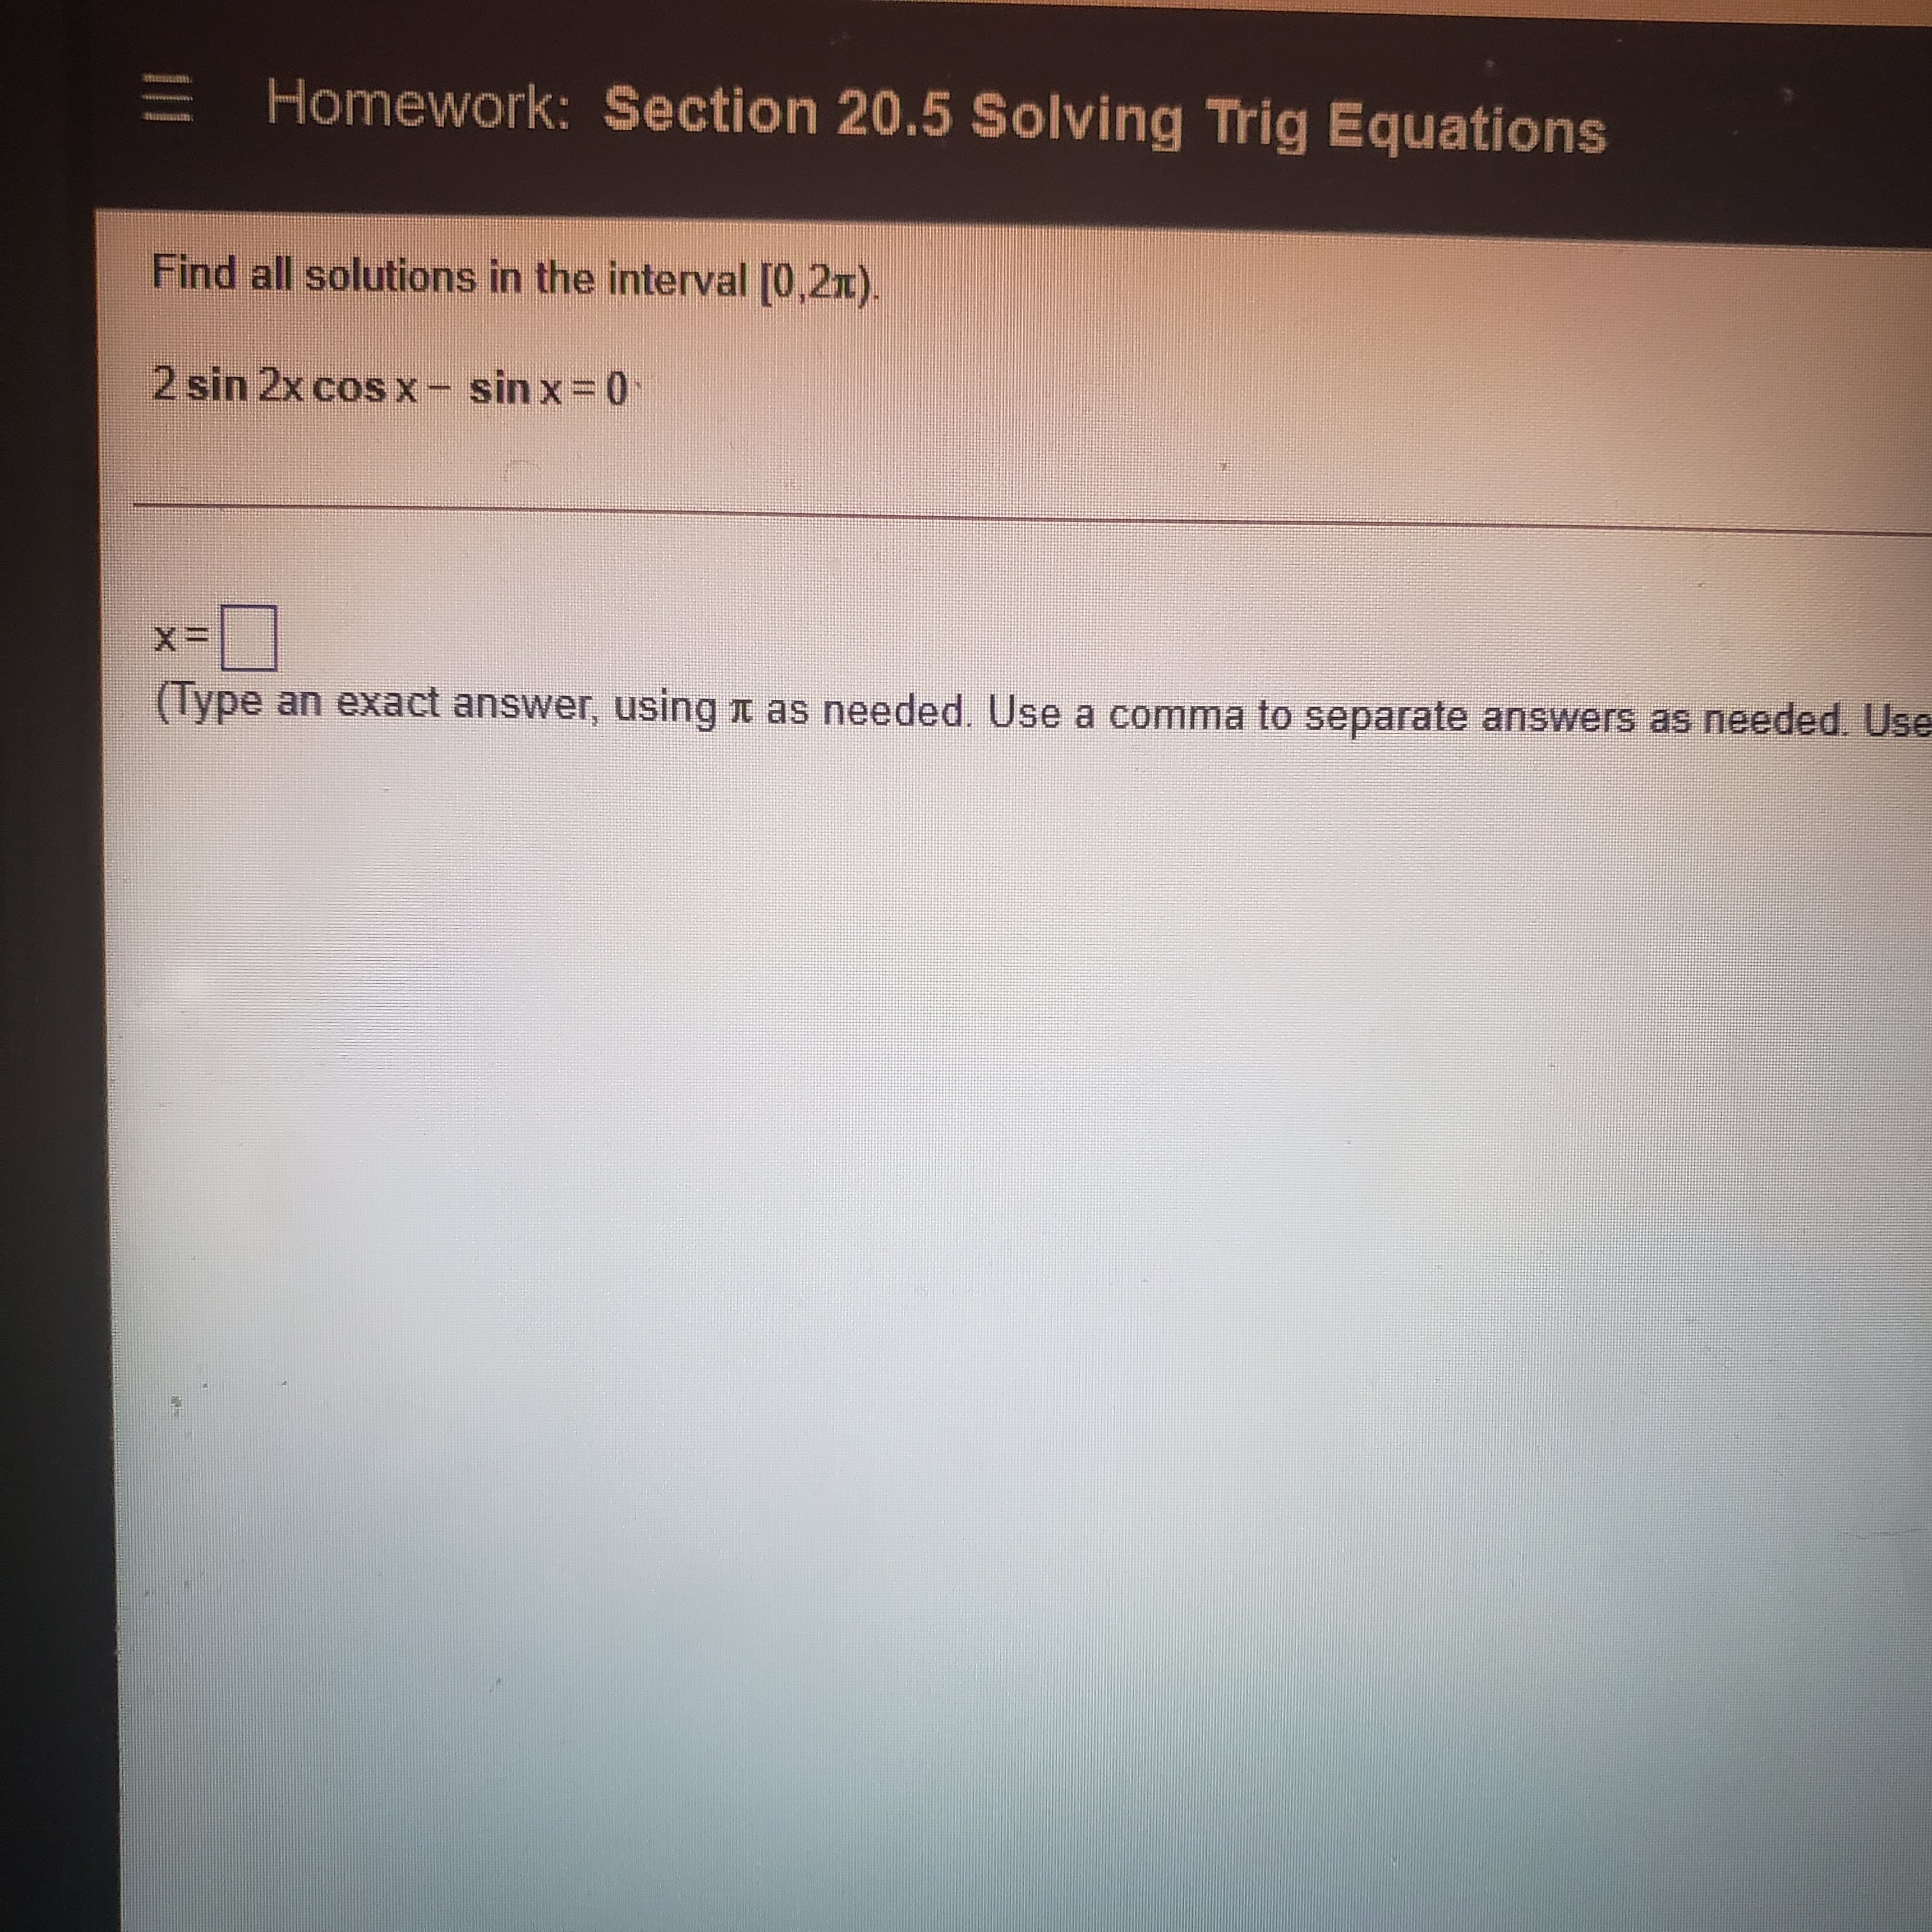 E Homework: Section 20.5 Solving Trig Equations
Find all solutions in the interval [0,2x).
2 sin 2x cos x - sin x 0
(Type an exact answer, using n as needed. Use a comma to separate answers as needed. Use
